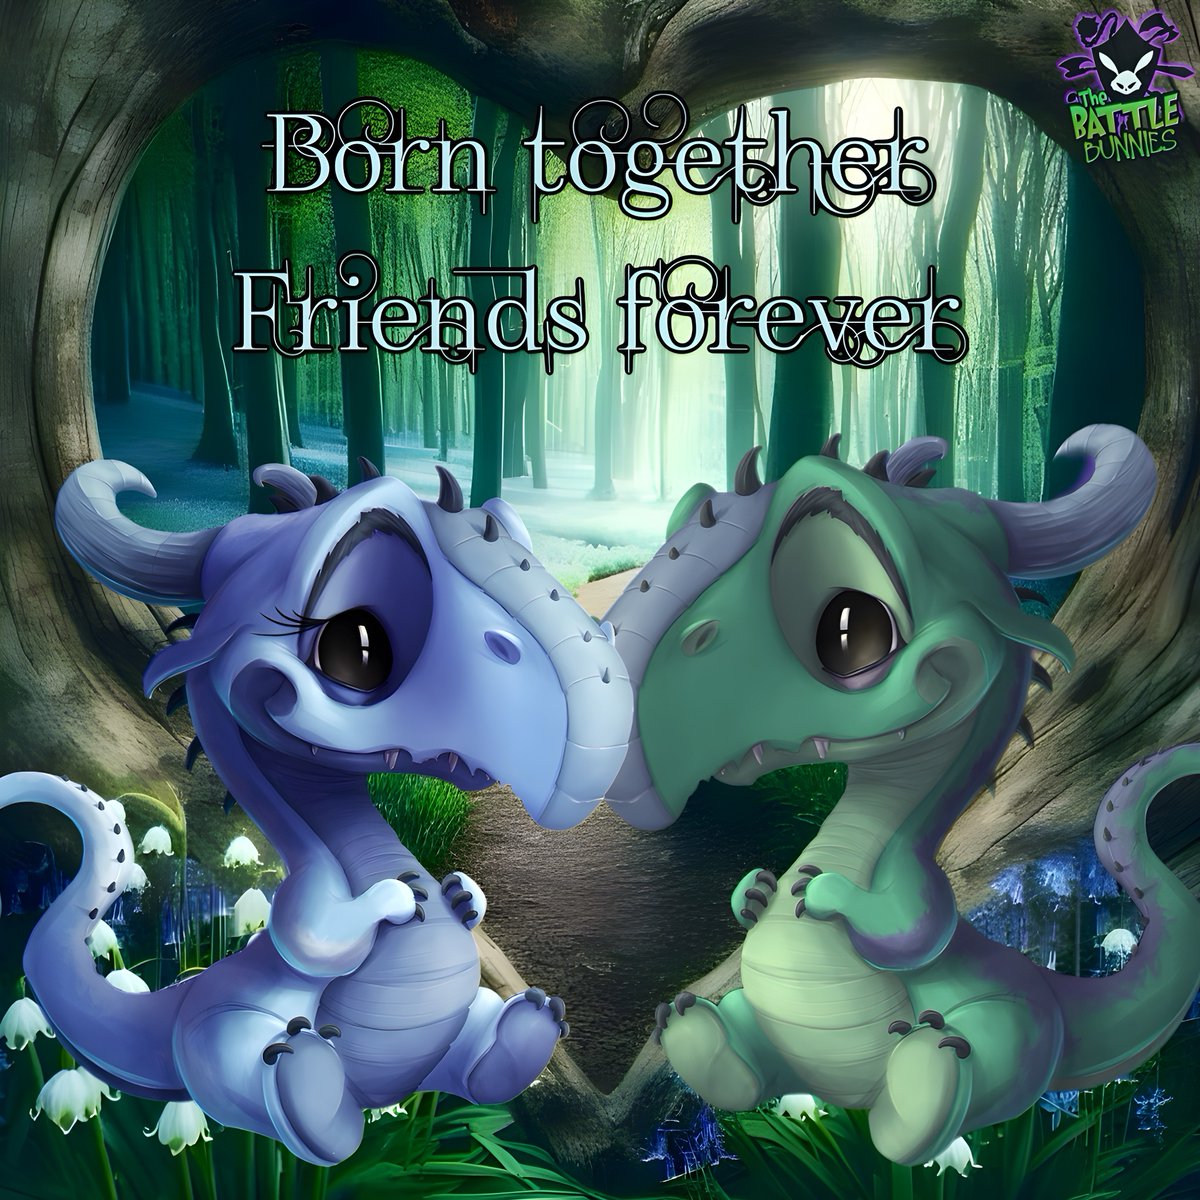 Sugar & Spice n everything nice, oh my gosh it happened twice!! Tis double trouble over @battlebunniesTM 🩶💚 

Hoppy #FirstBirthday my fiery lil princess & noble knight, may your adventures be bold & your future bright! 🎉🐉🐉 #flufflefam #friendsforever #Dragons #twinsbirthday